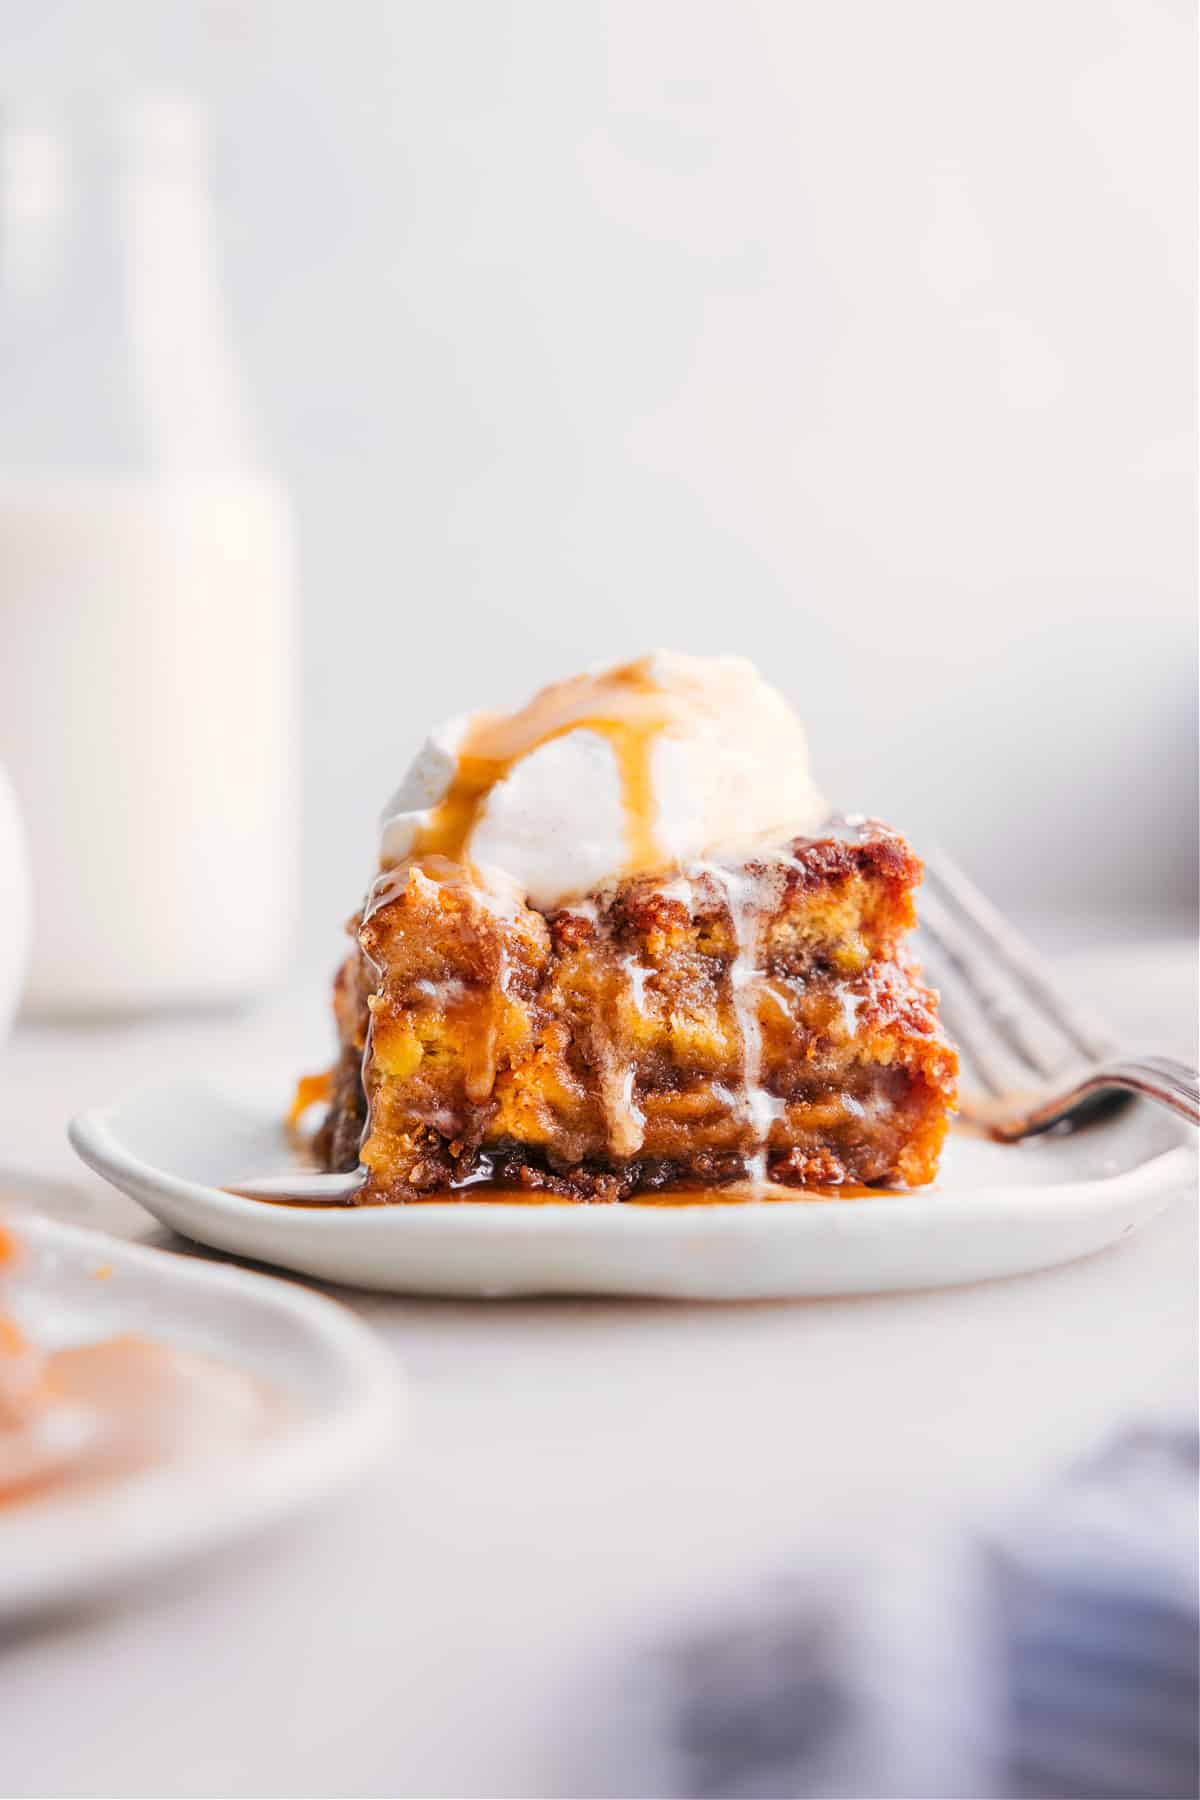 A slice of bread pudding topped with a scoop of ice cream, served warm as a delicious dessert.